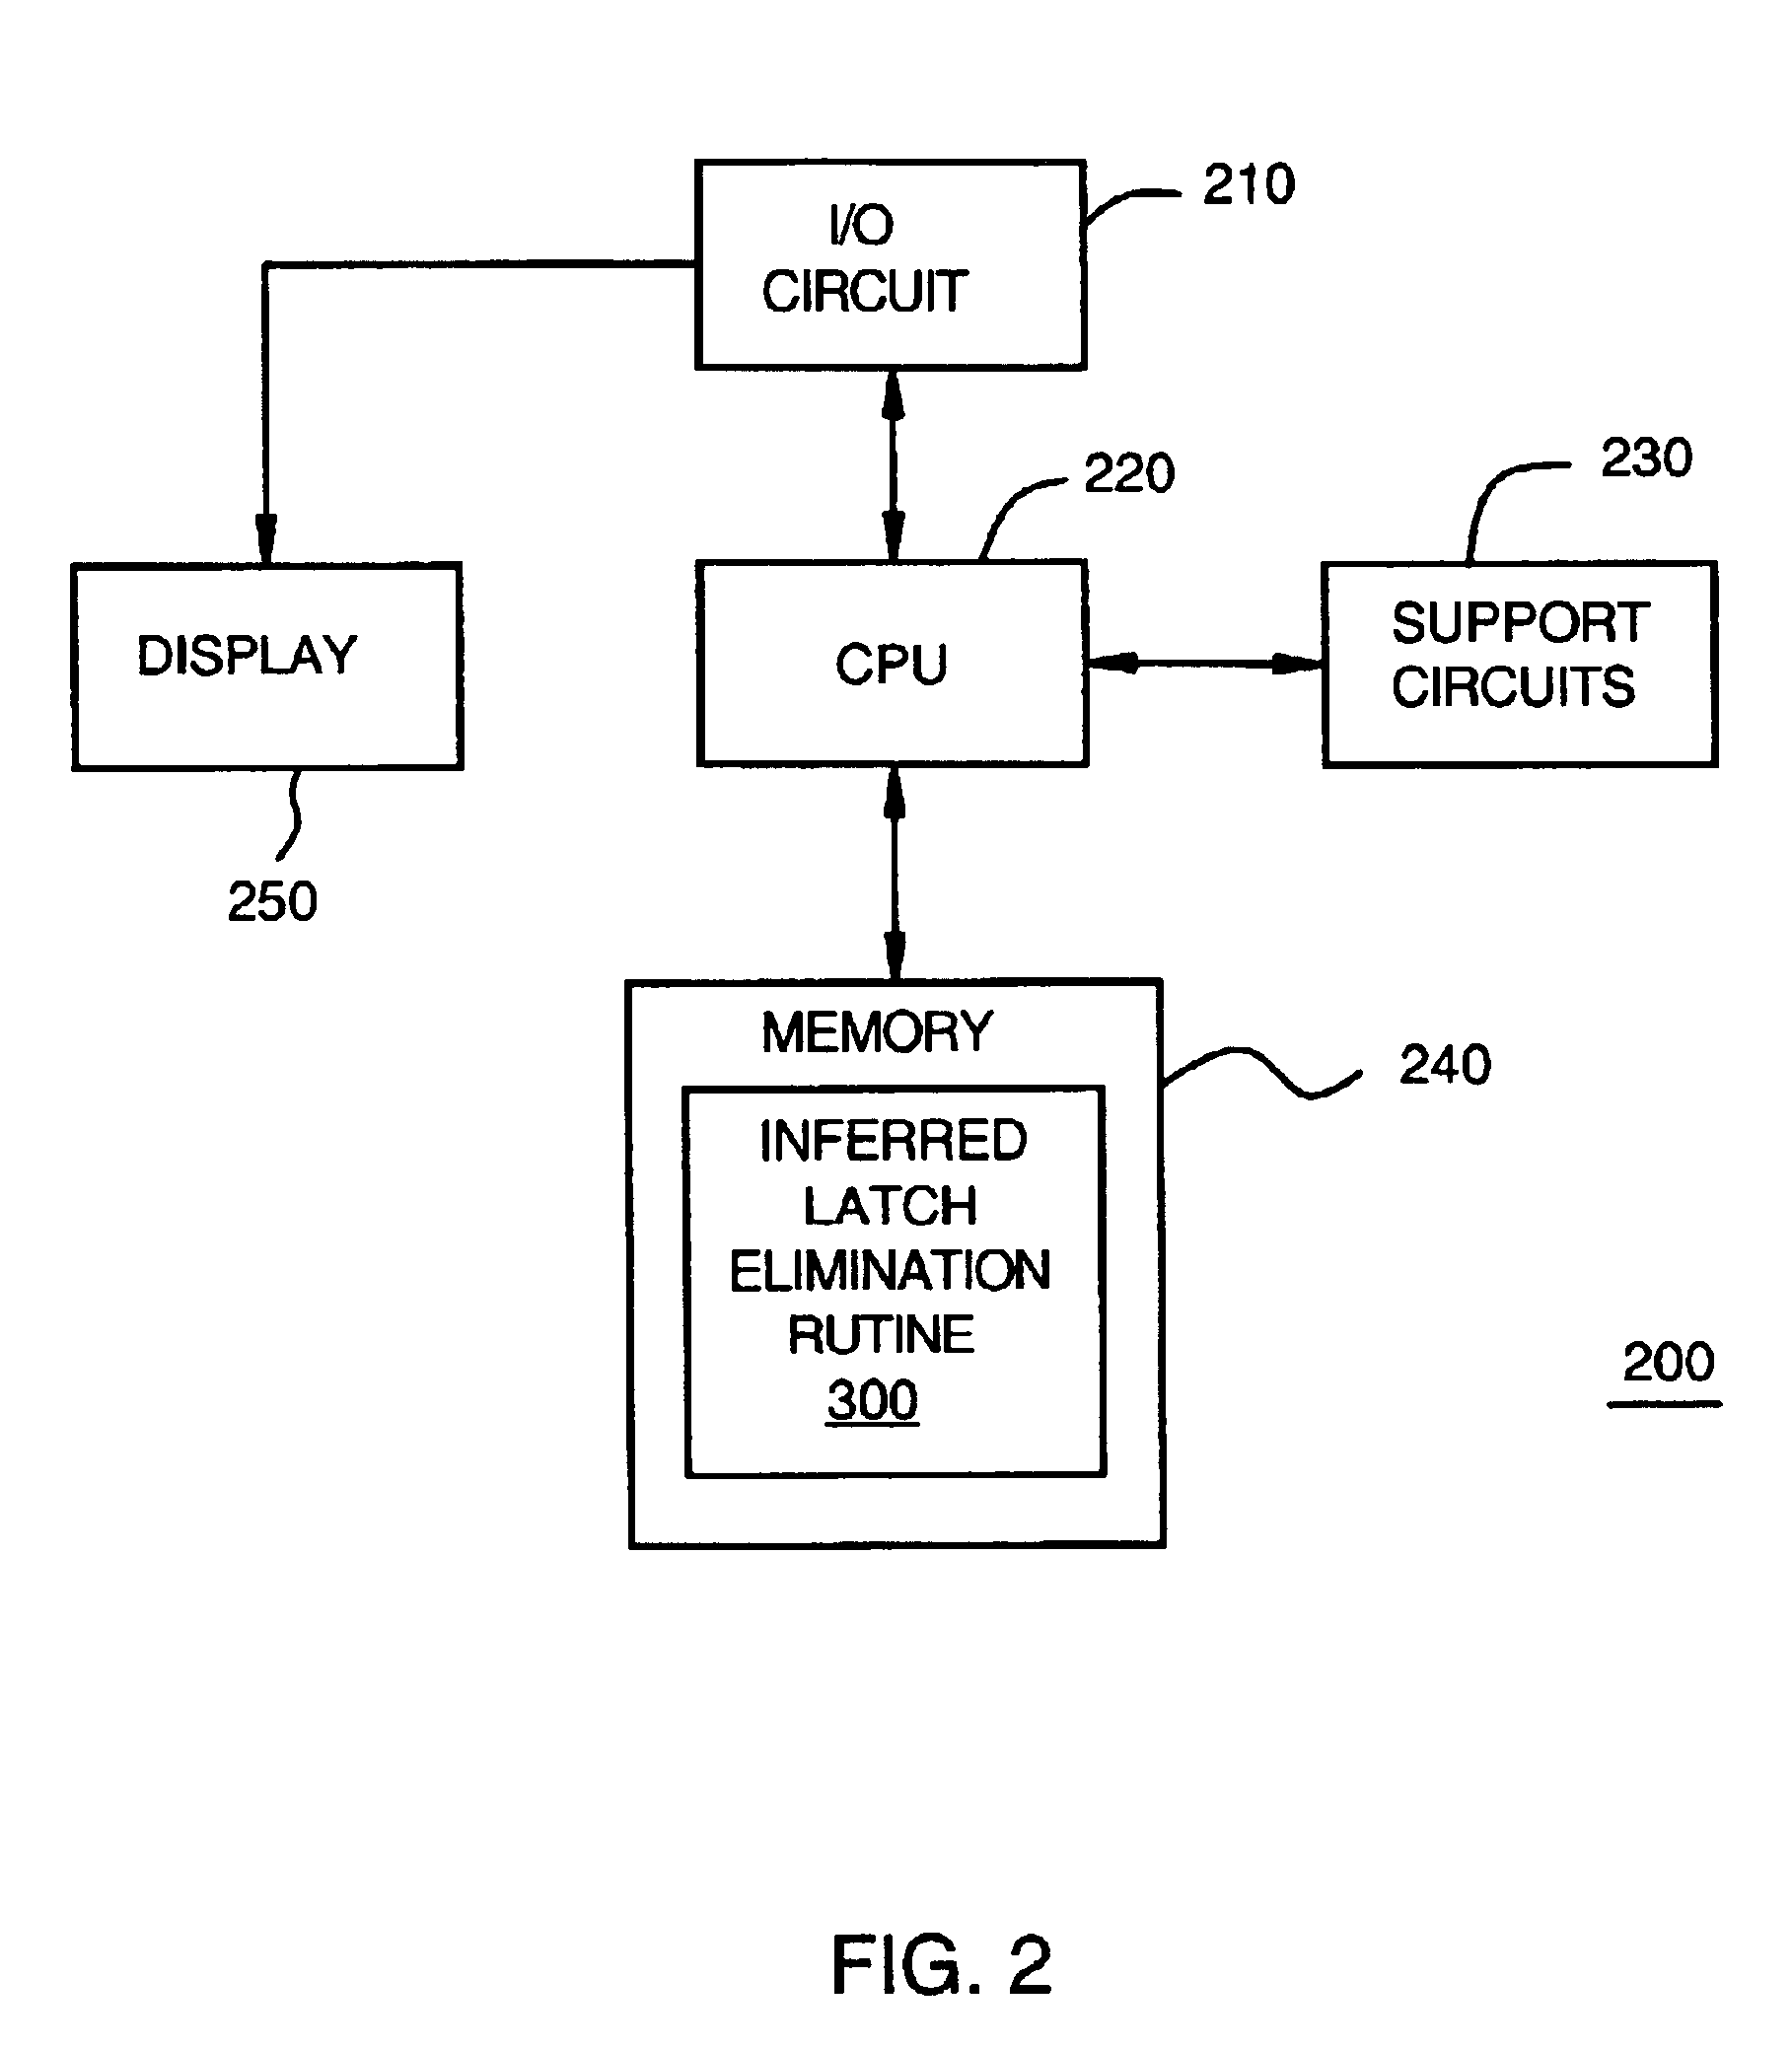 Method and apparatus for automatically eliminating inferred latches